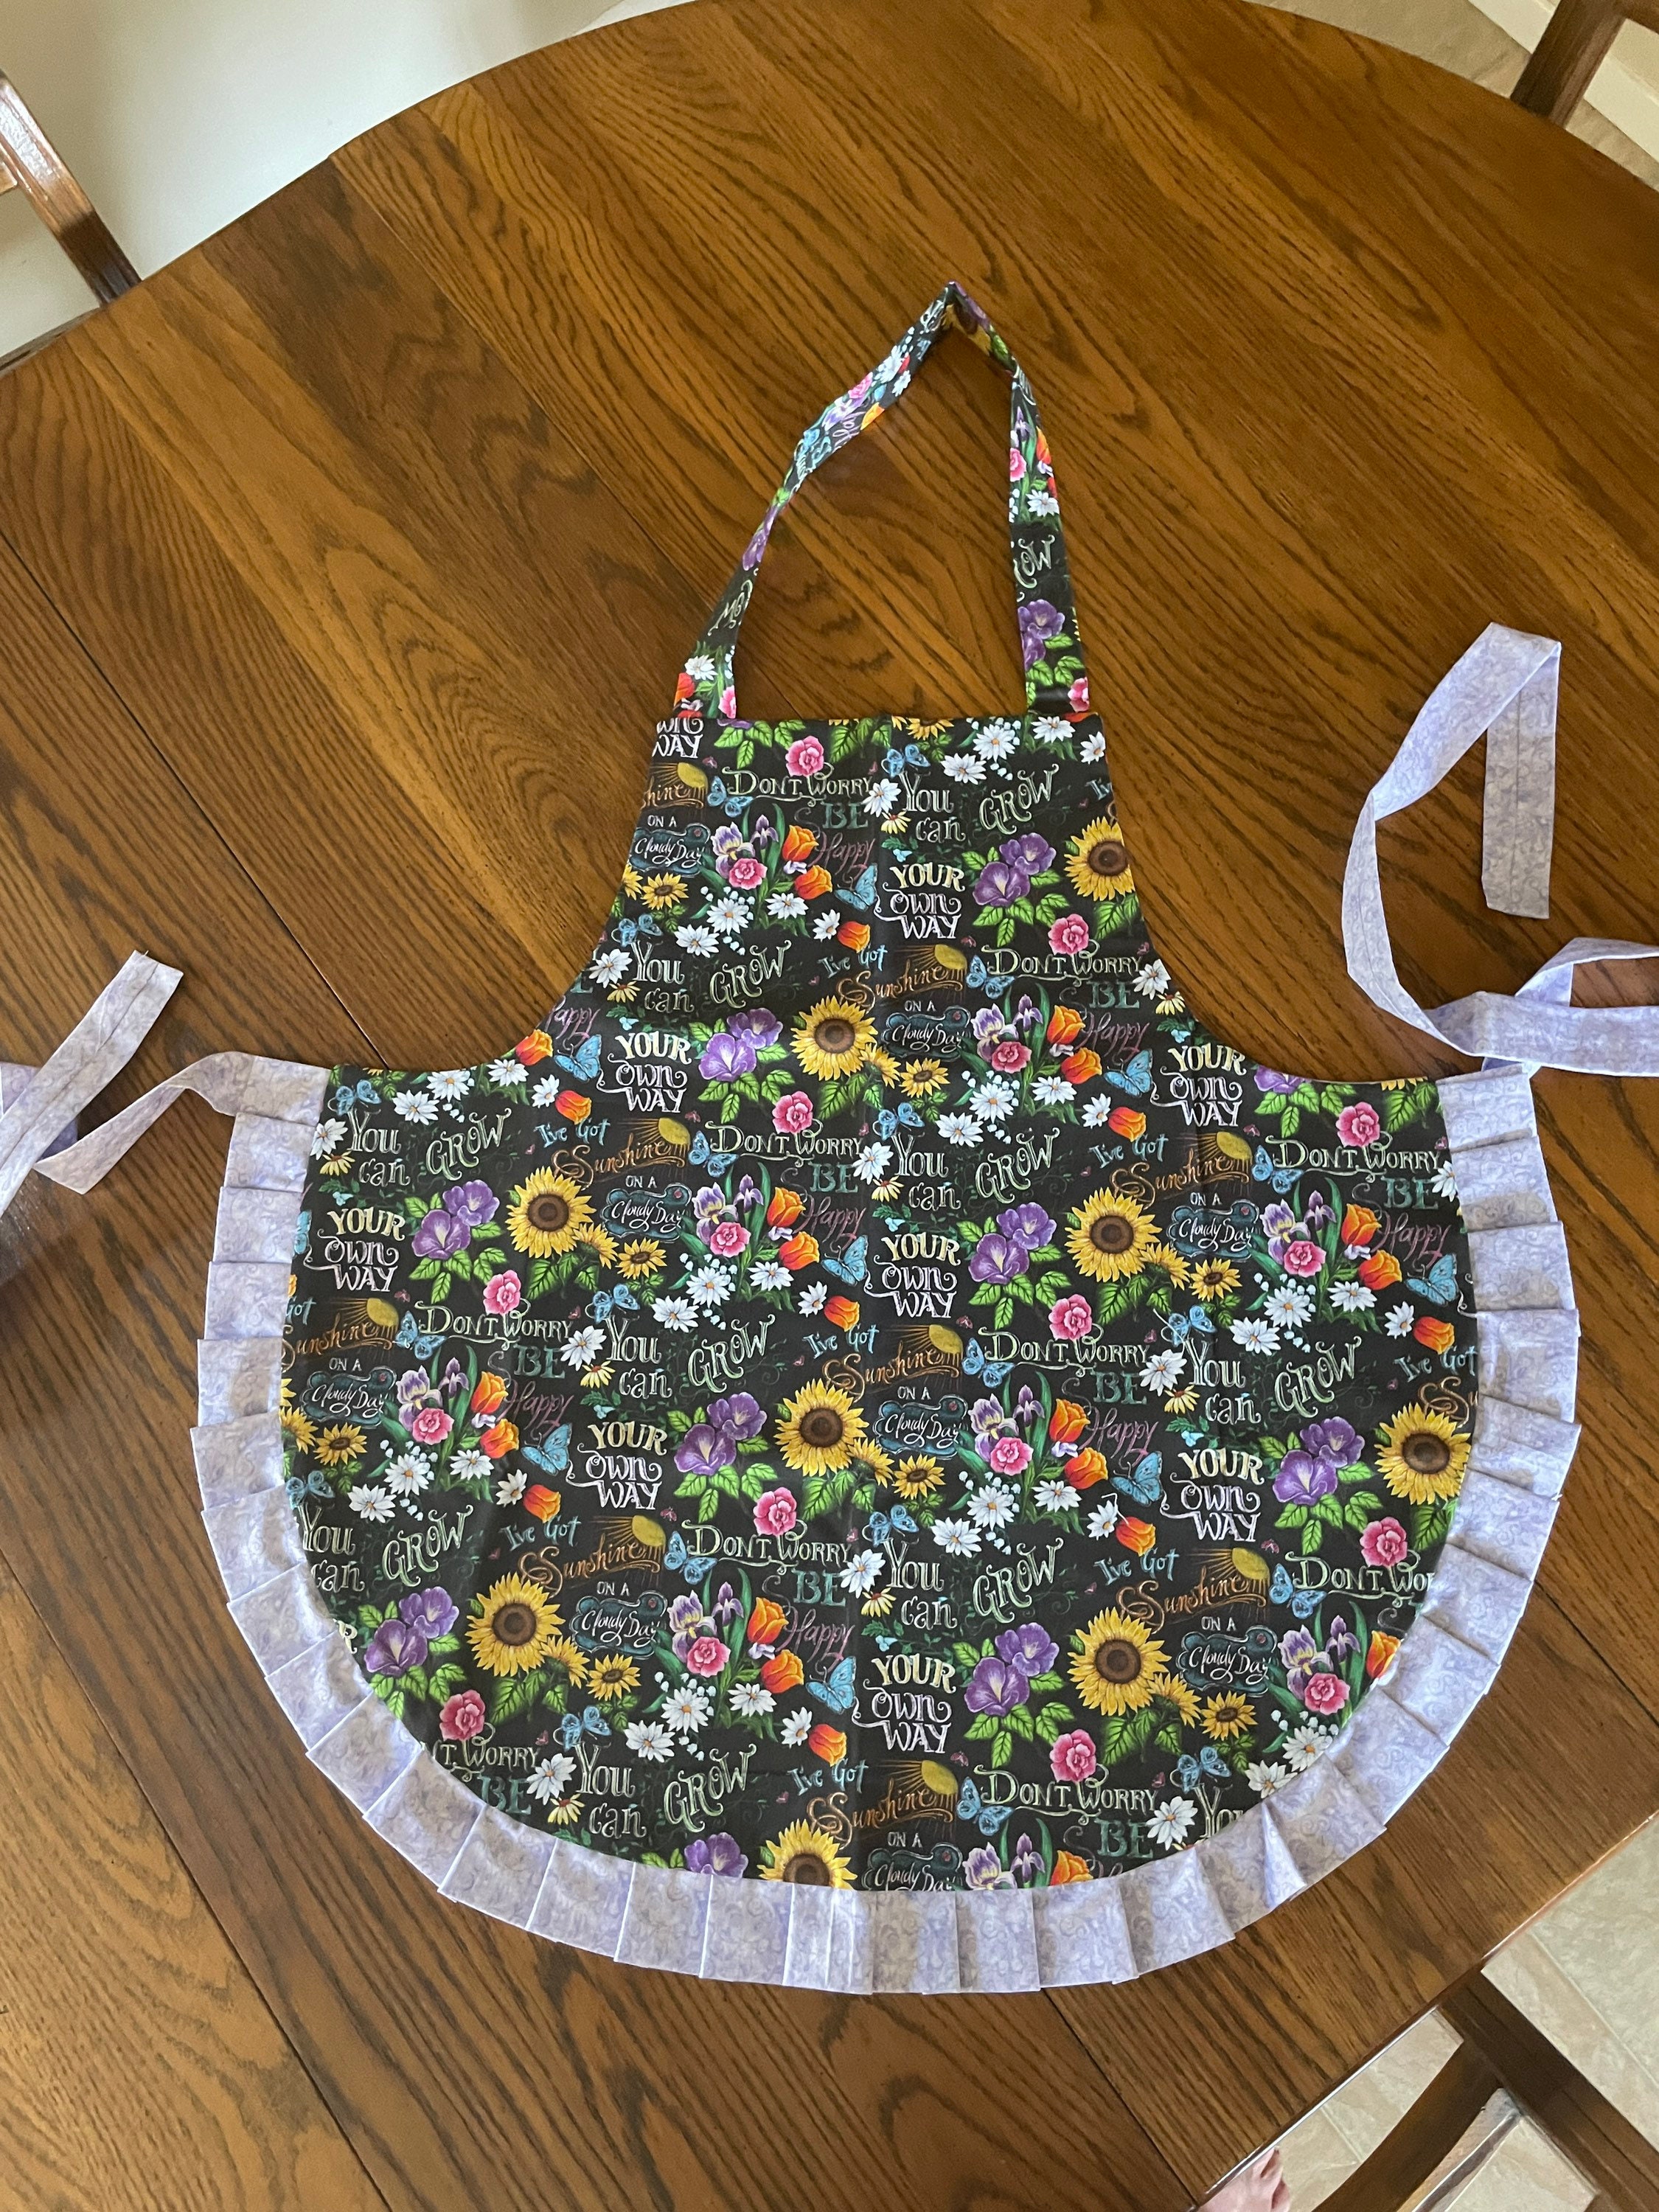 Pottery Apron for My Artist Sister! (Made in about 3 hours!) : r/sewing